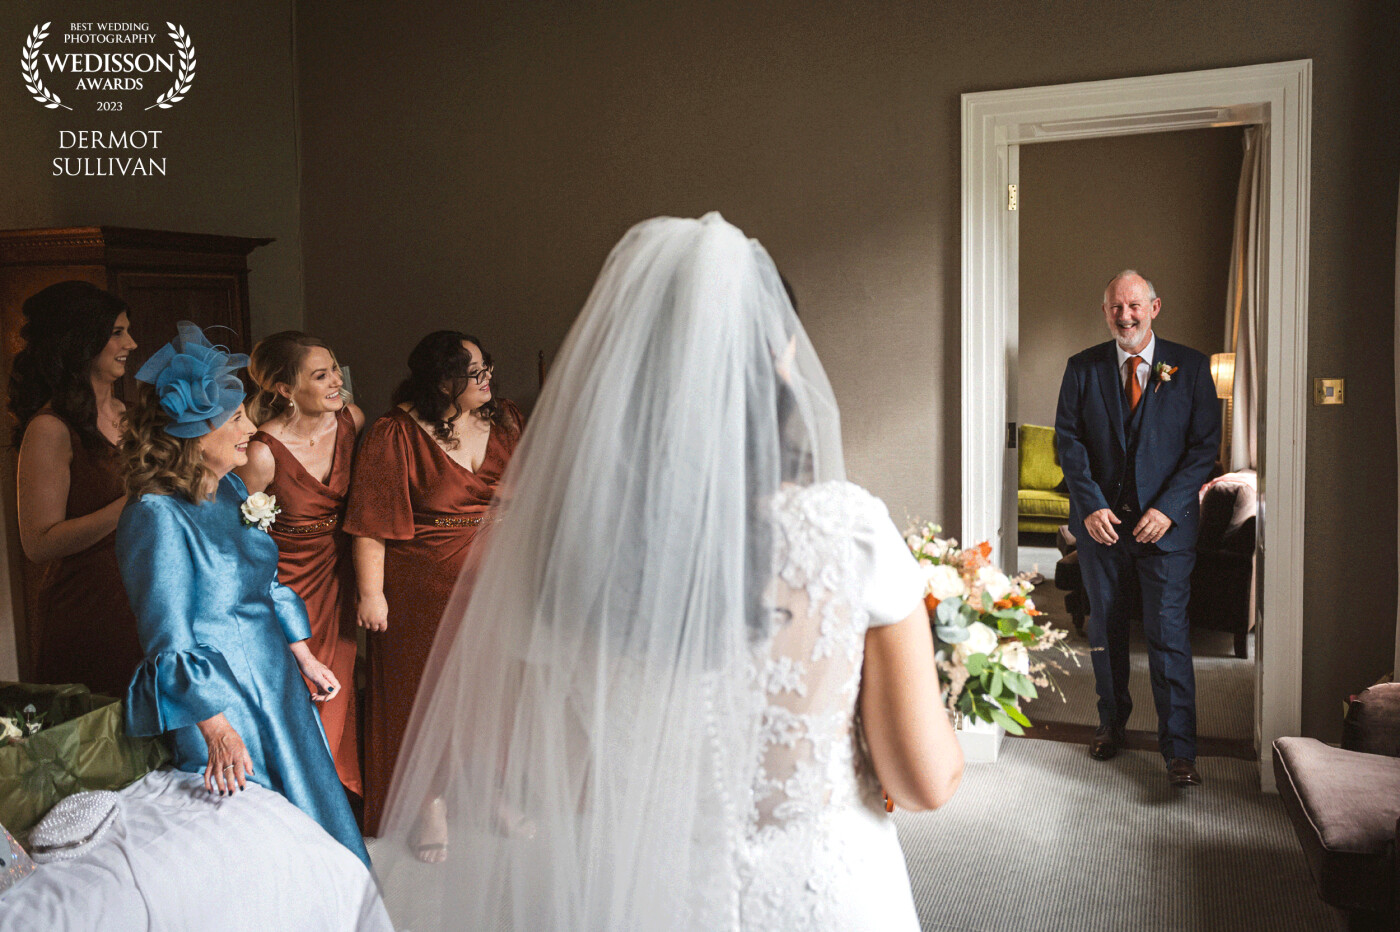 This is the classic wedding day moment when the brides father sees her in her dress for the first time. For this photograph, I positioned the brides mother and bridesmaids off the the side so that I could get their reactions too.